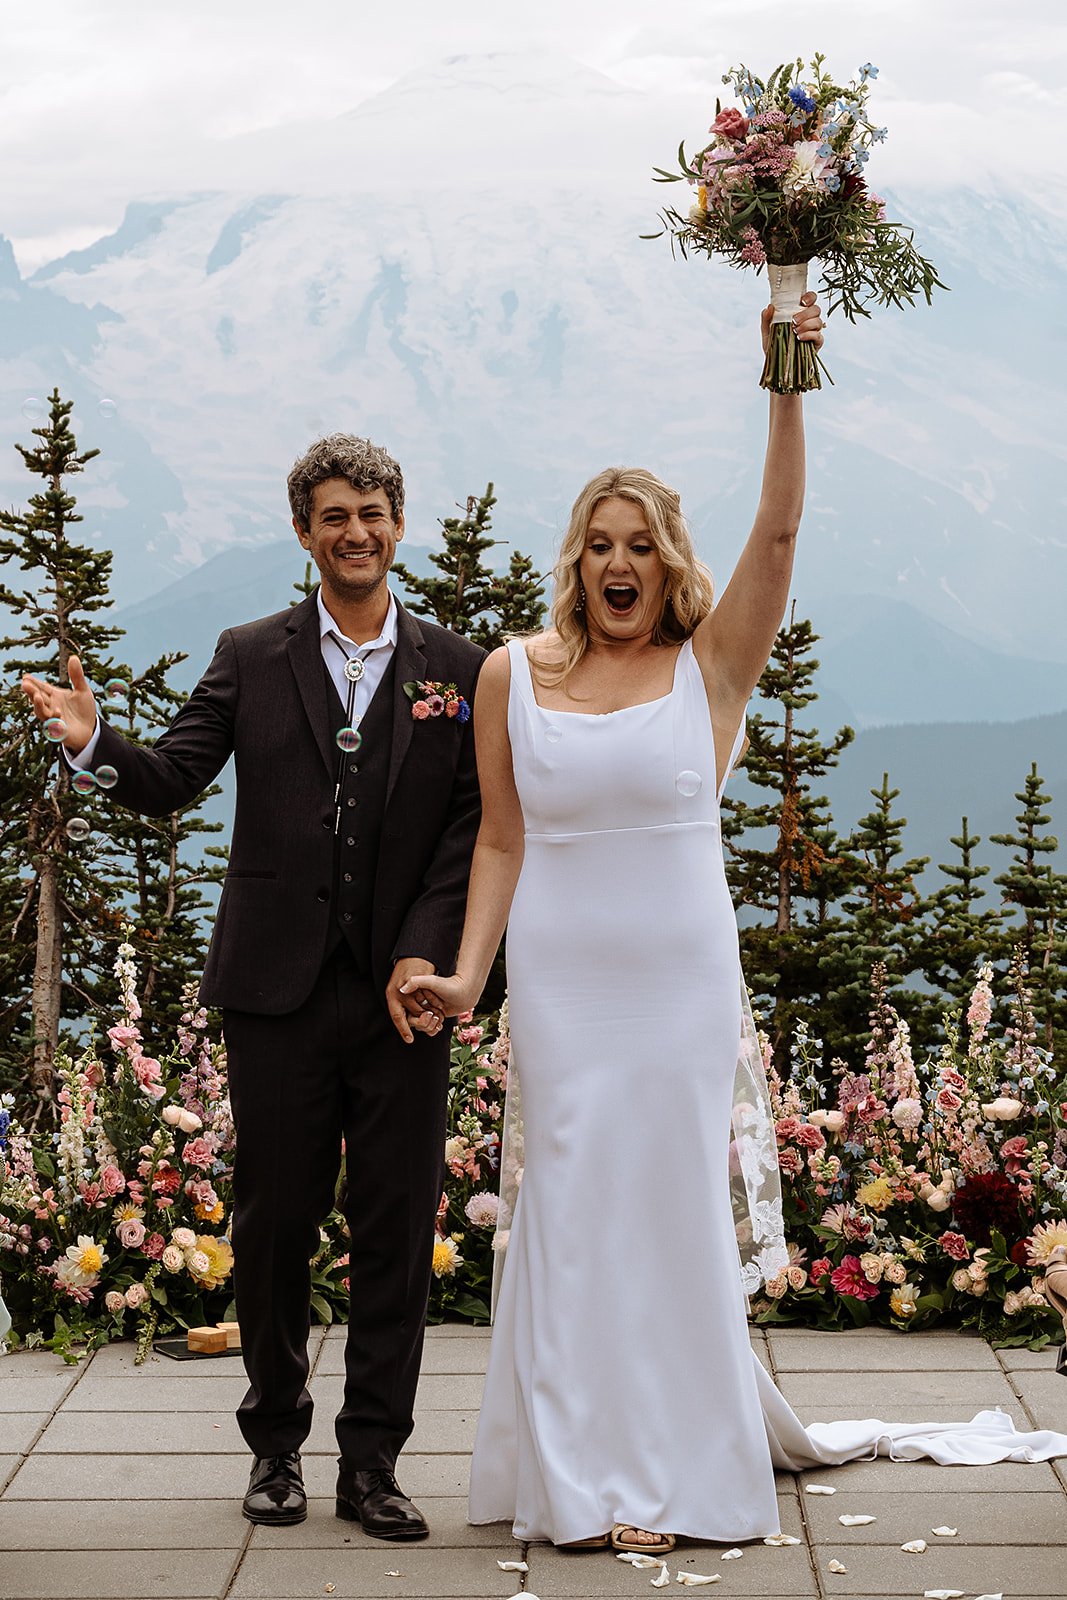 Colorful Outdoor Wedding at Crystal Mountain Resort